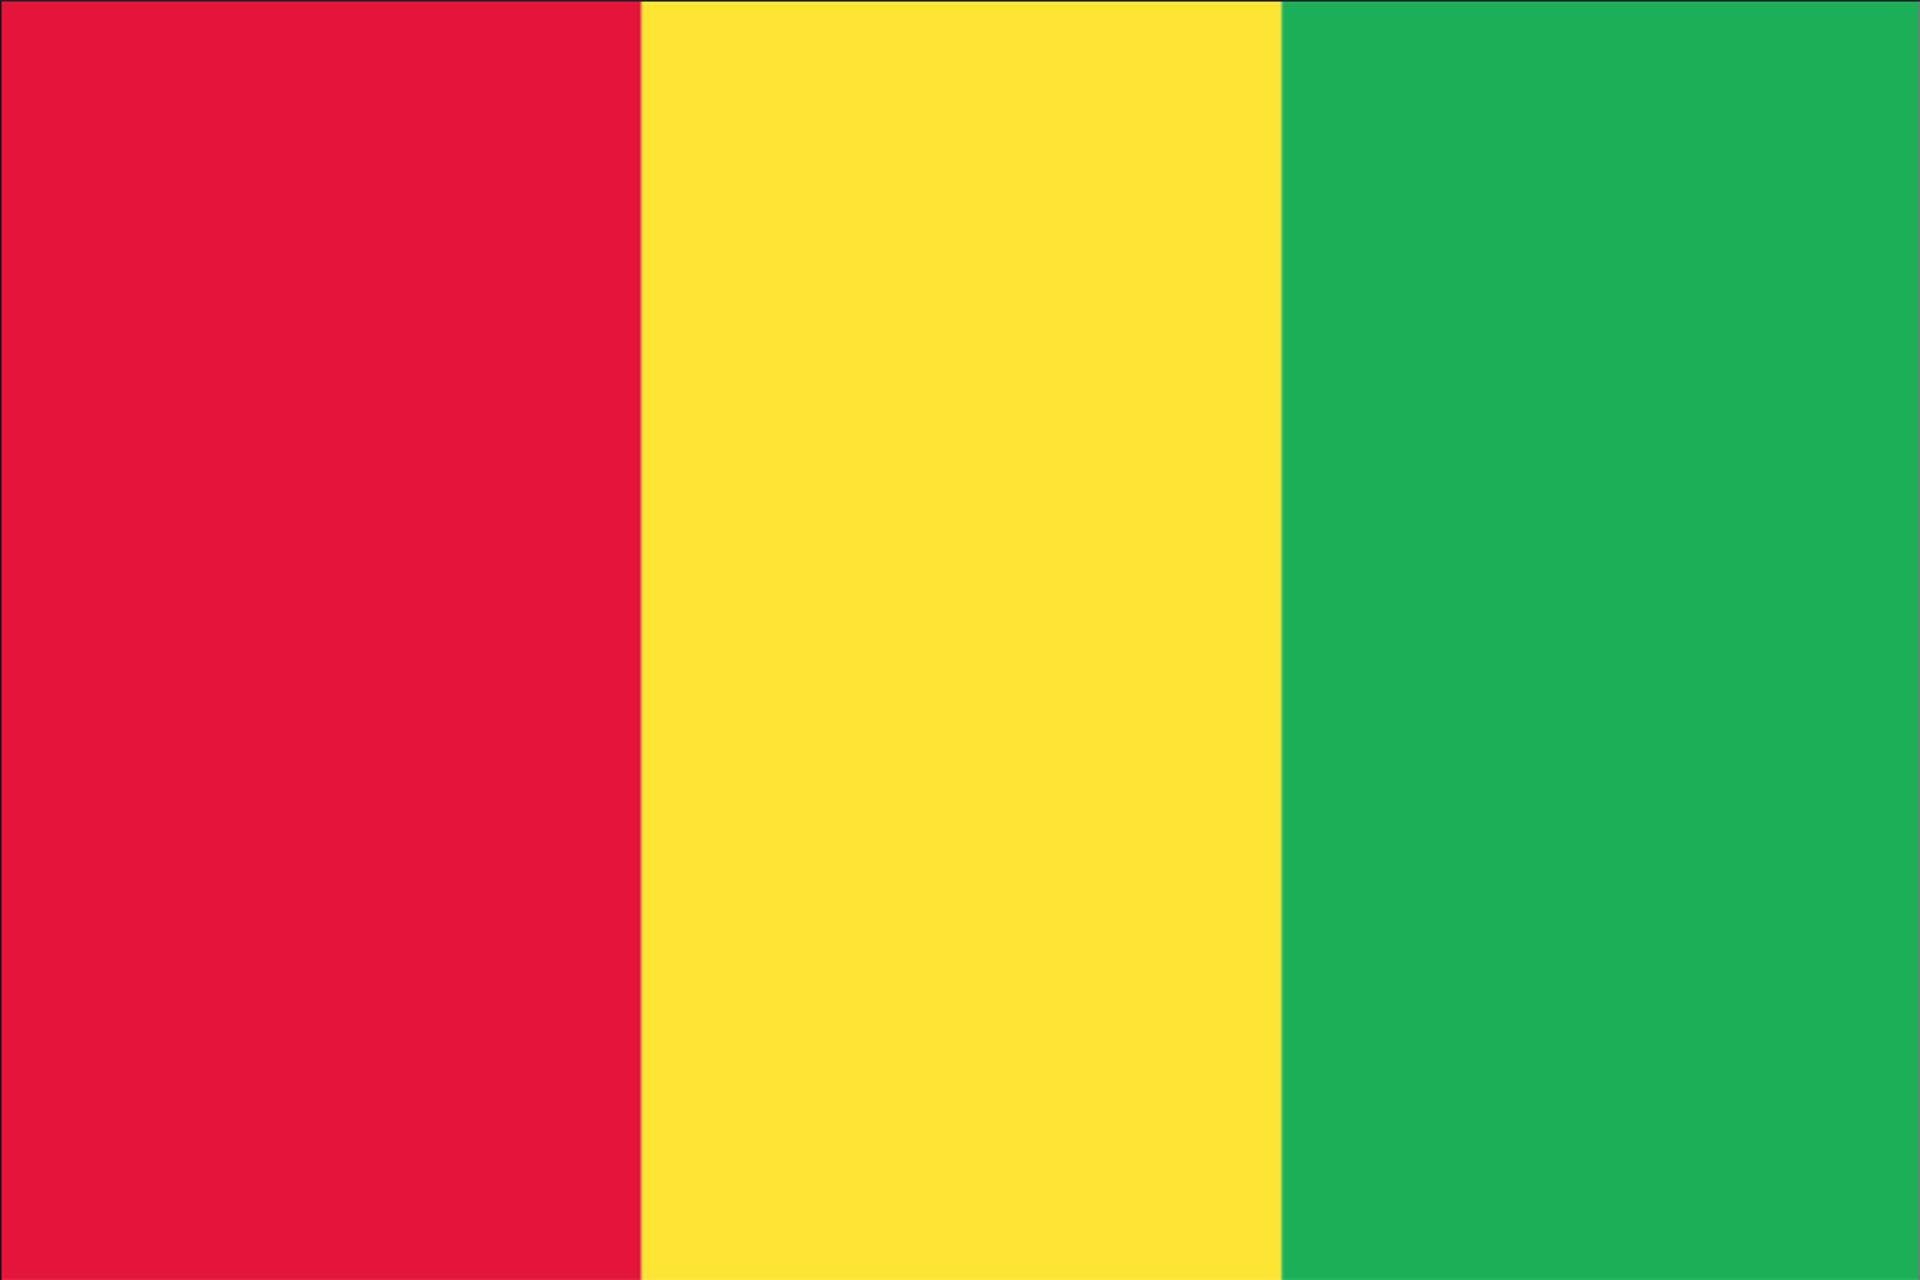 110 Querformat g/m² flaggenmeer Guinea Flagge Flagge